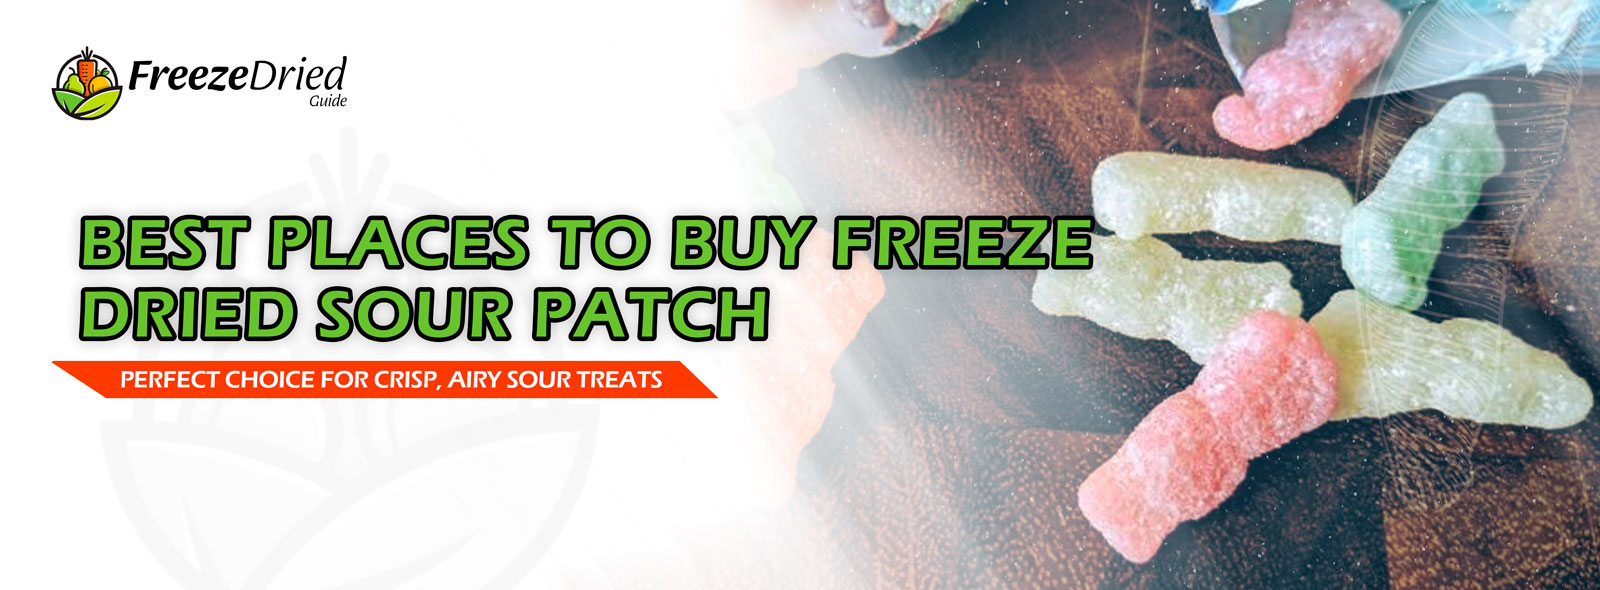 Where to Buy Freeze-Dried Sour Patch